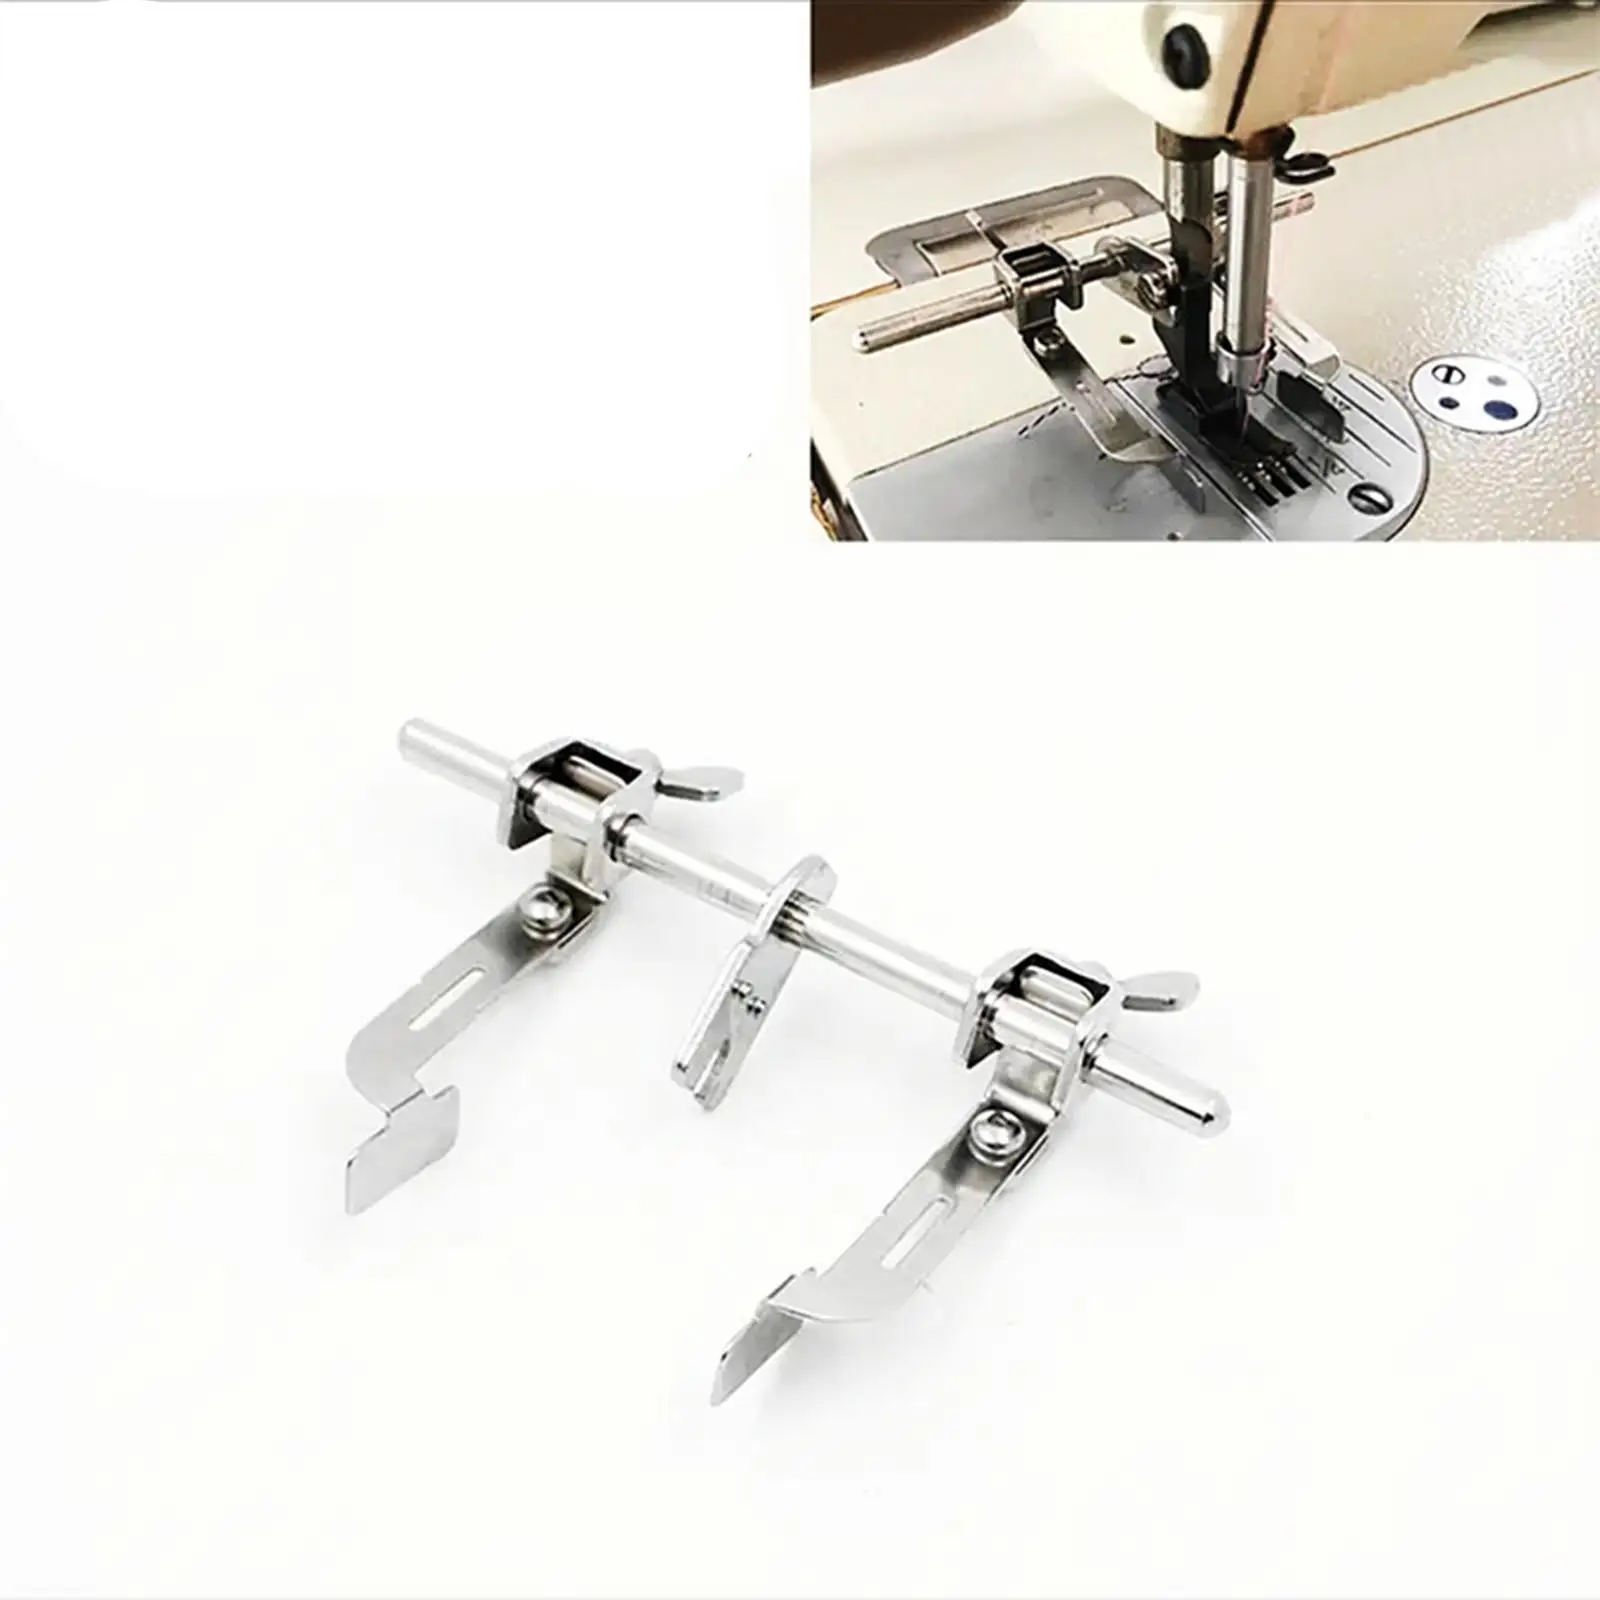 Sewing Machine Double Guide Stitch Ruler Tailors Sewing Machine Double Edge Seam Aid for Industrial Sewing Accessories